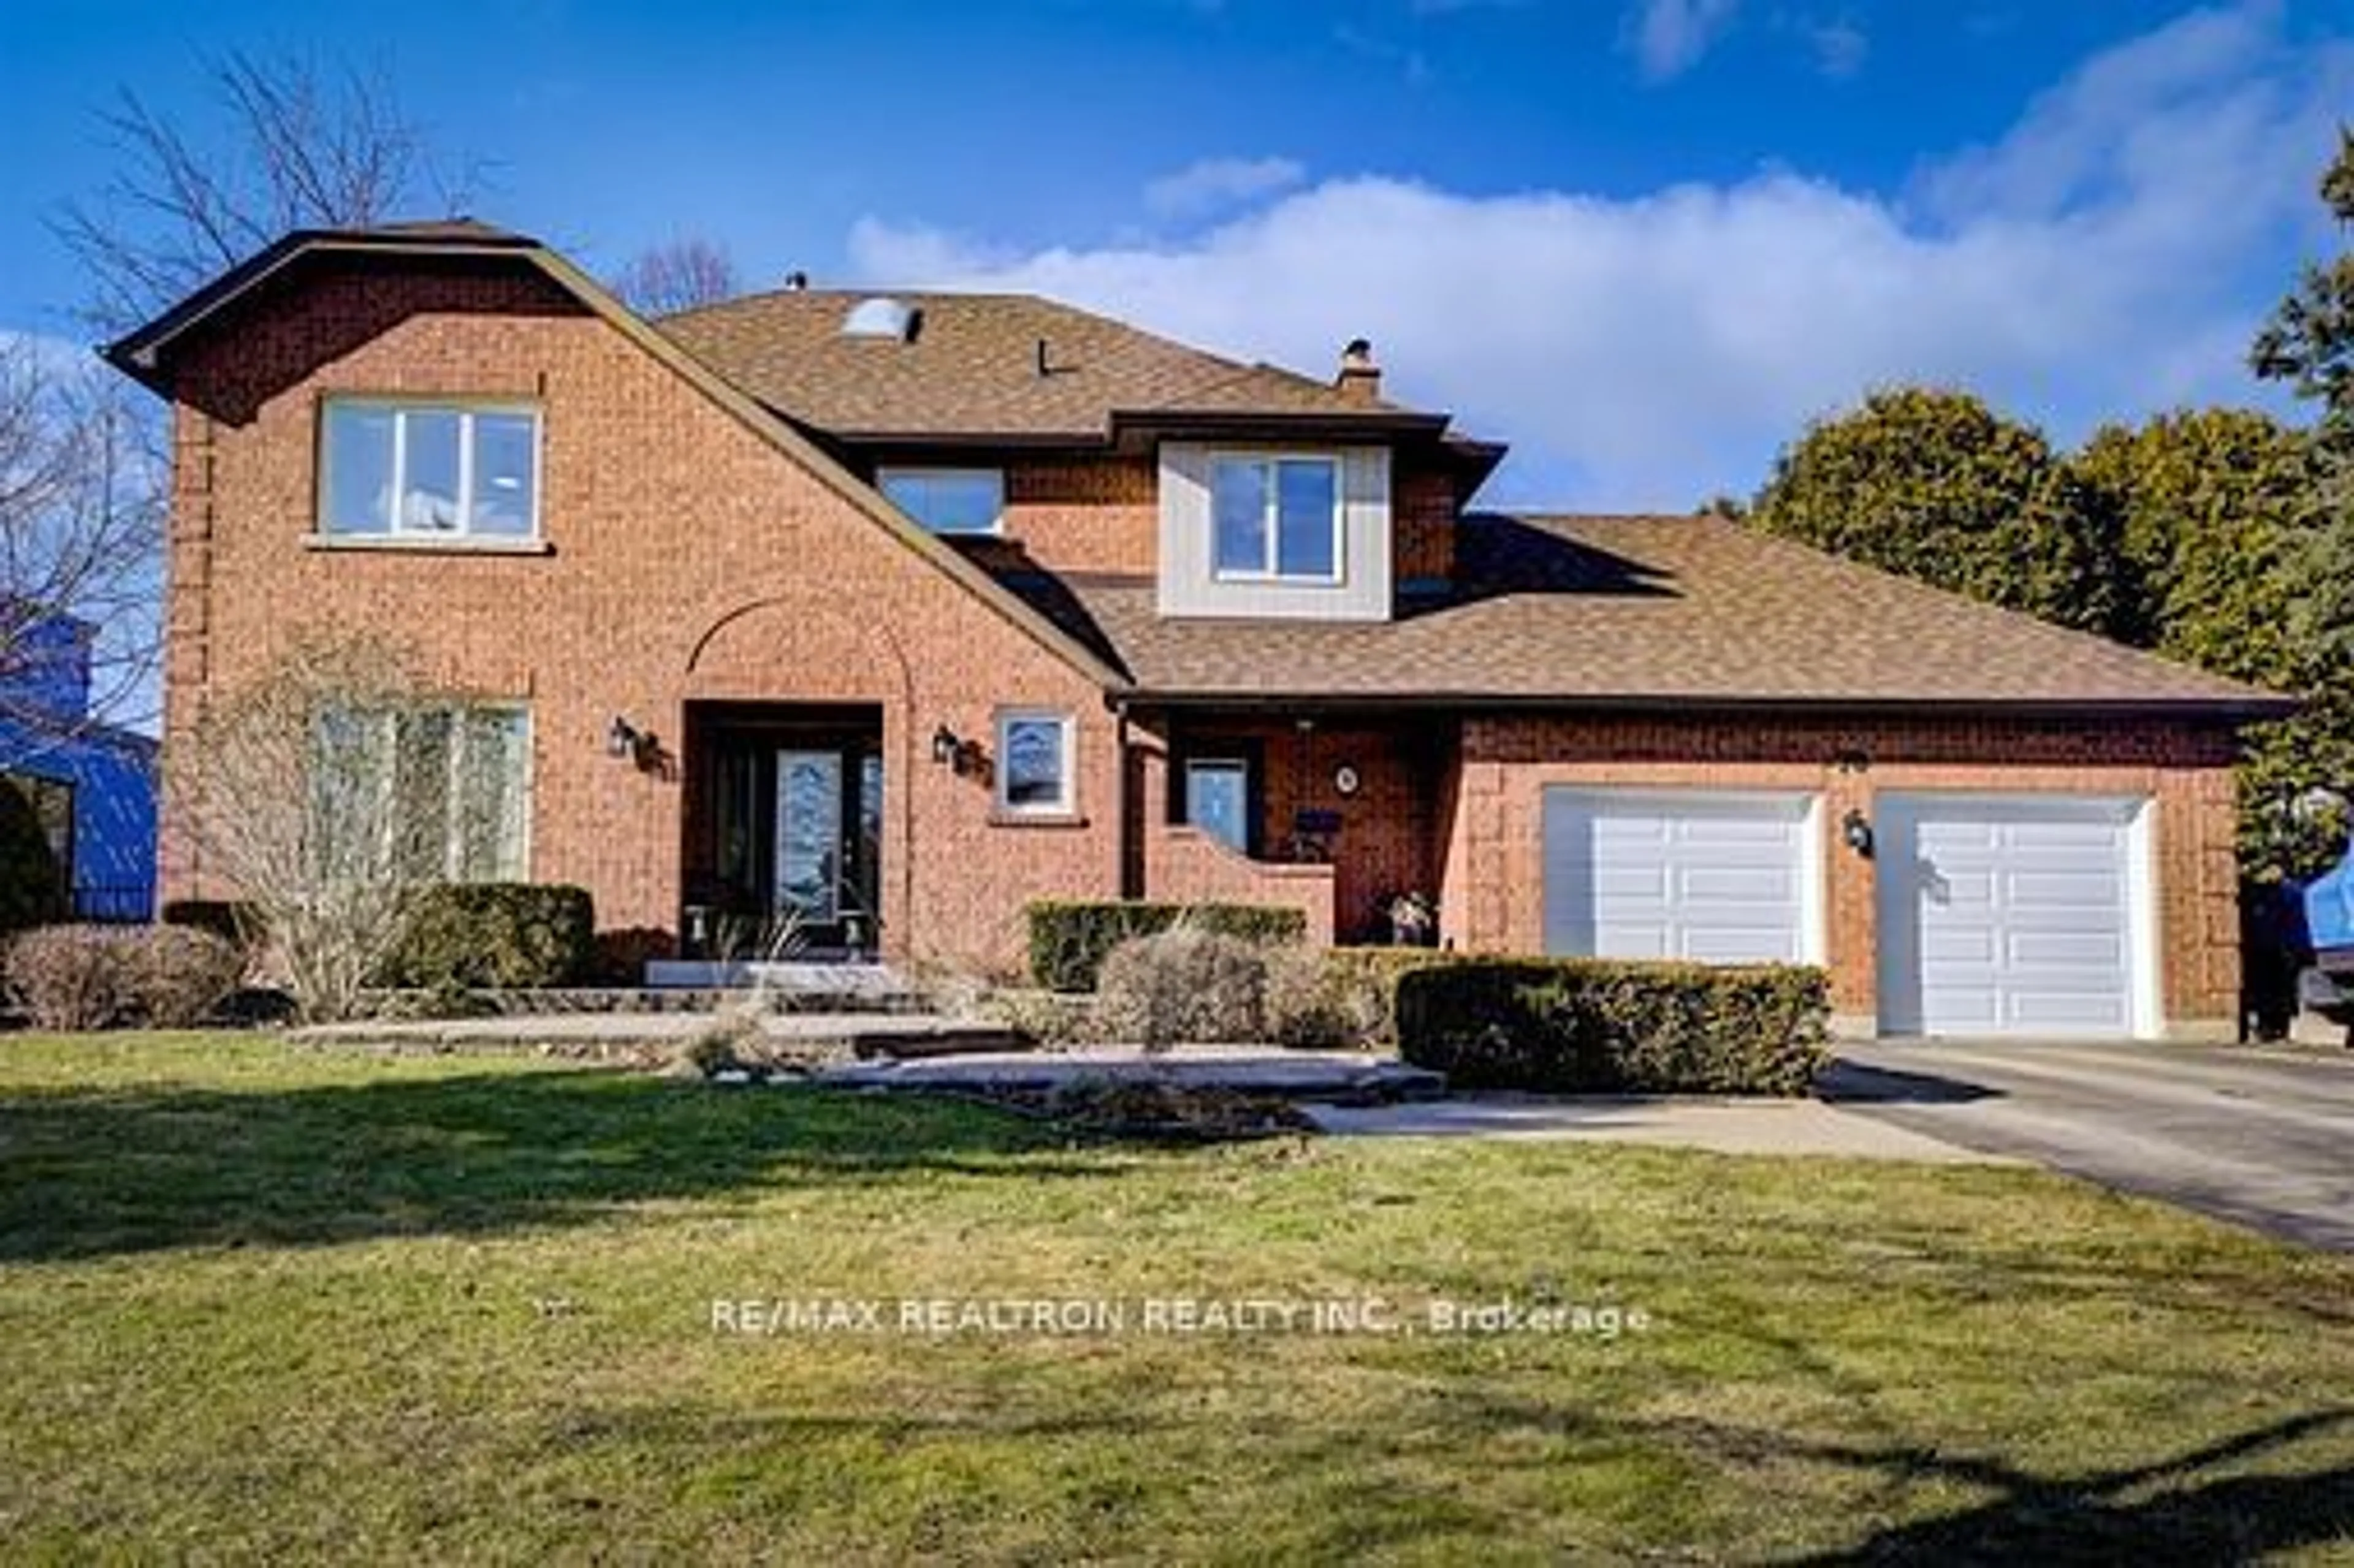 Home with brick exterior material for 70 Humber Valley Cres, King Ontario L7B 1B7